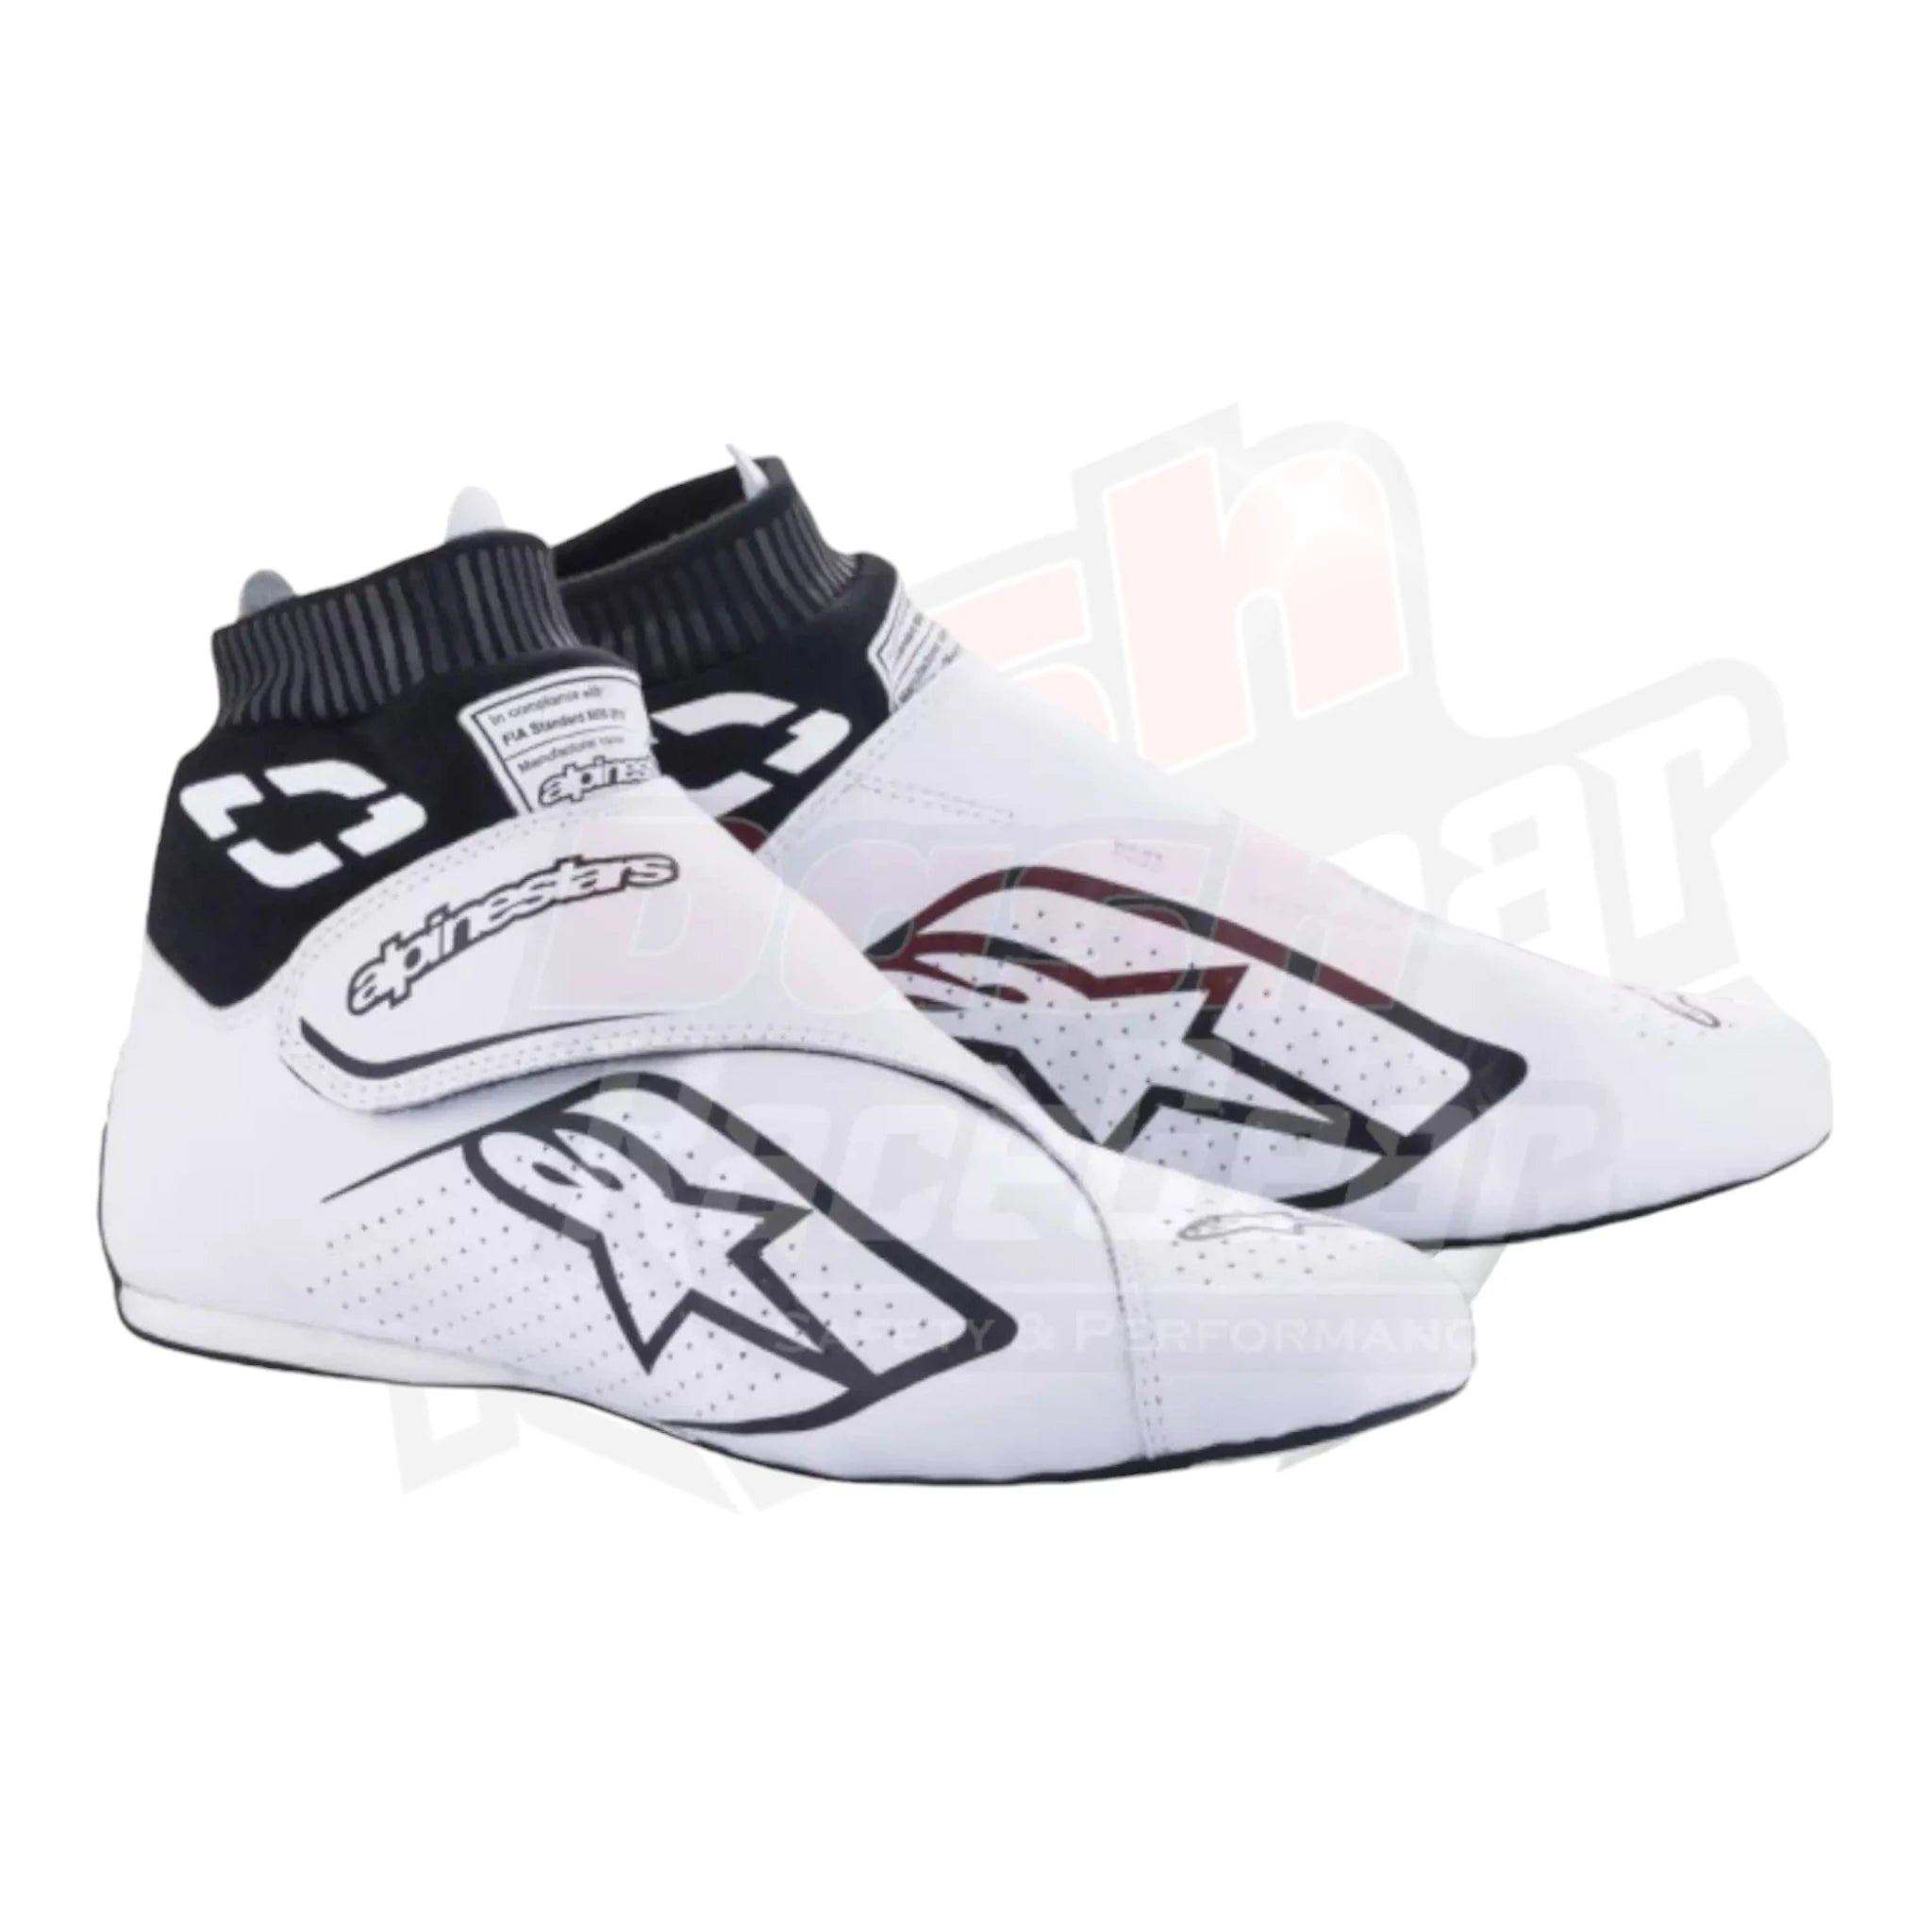 2017 George Russell BWT Alpinestar F1 Race Shoes